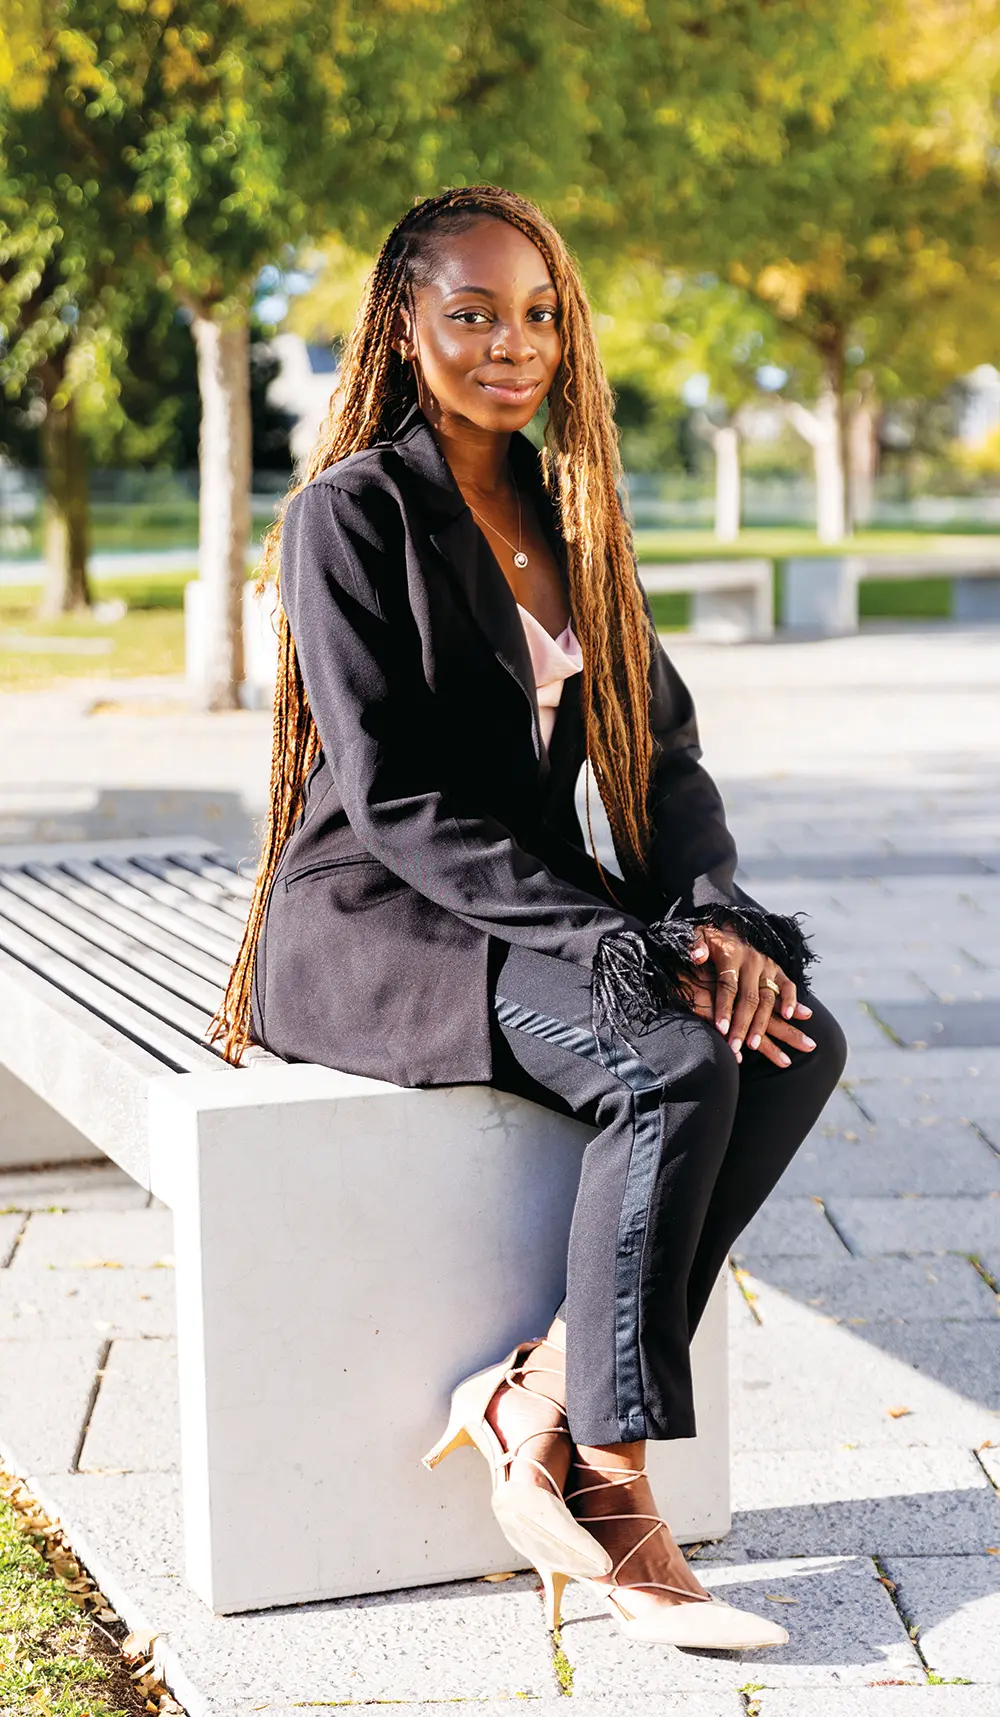 Portrait close-up photograph view of Dayo Ajanaku grinning in a black open coat business blazer, pink blouse, necklace, black business dress pants, and beige high heel shoes as she is seated outside on a light grey bench somewhere during the day with her hands posed over each other on her knees